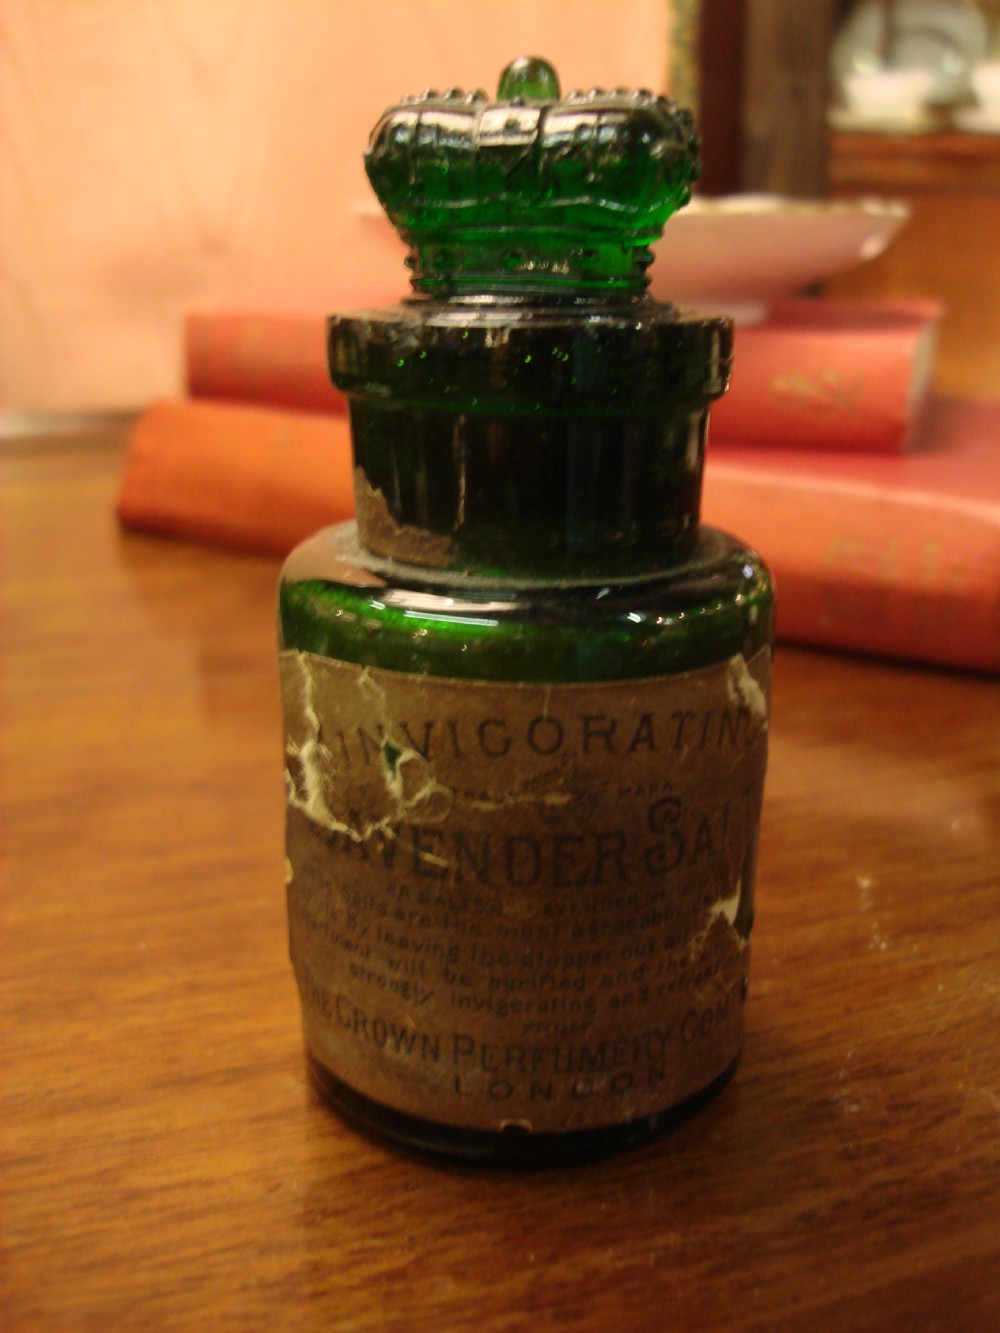 crown perfumery green glass crown topped bottle of lavender smelling salts